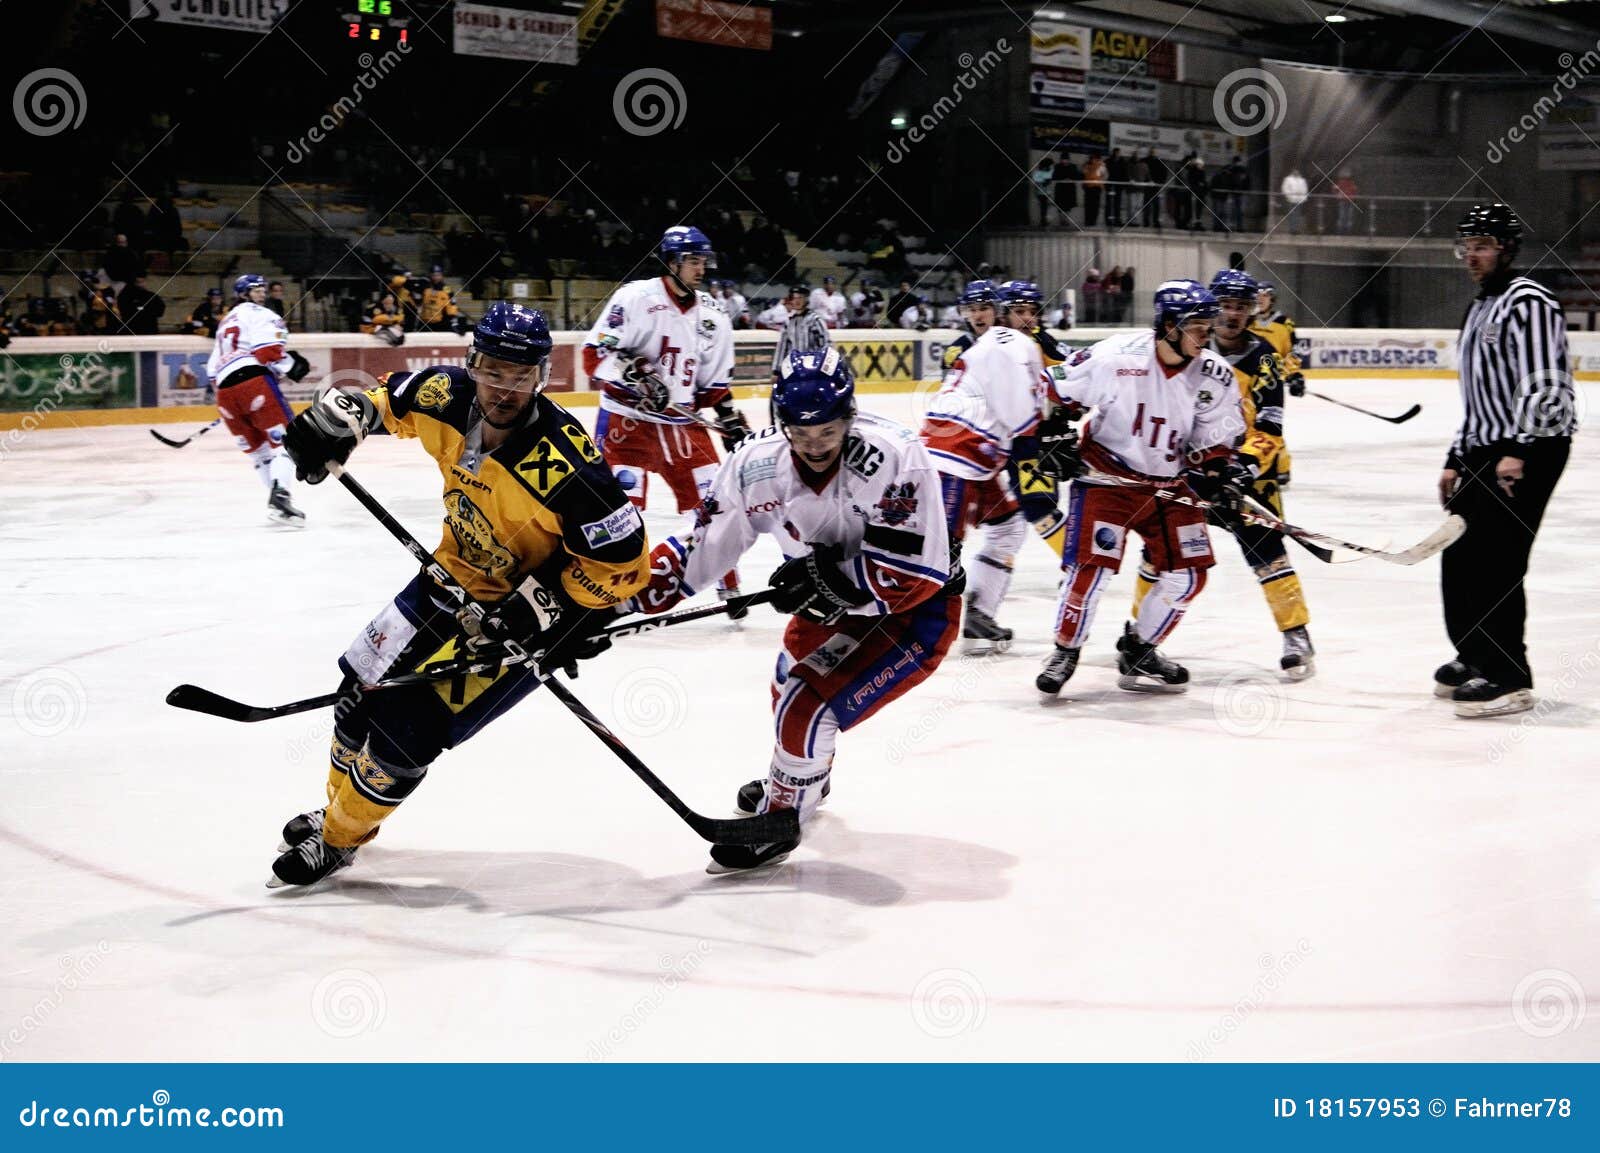 Hockey game editorial stock photo. Image of sport, action - 18157953